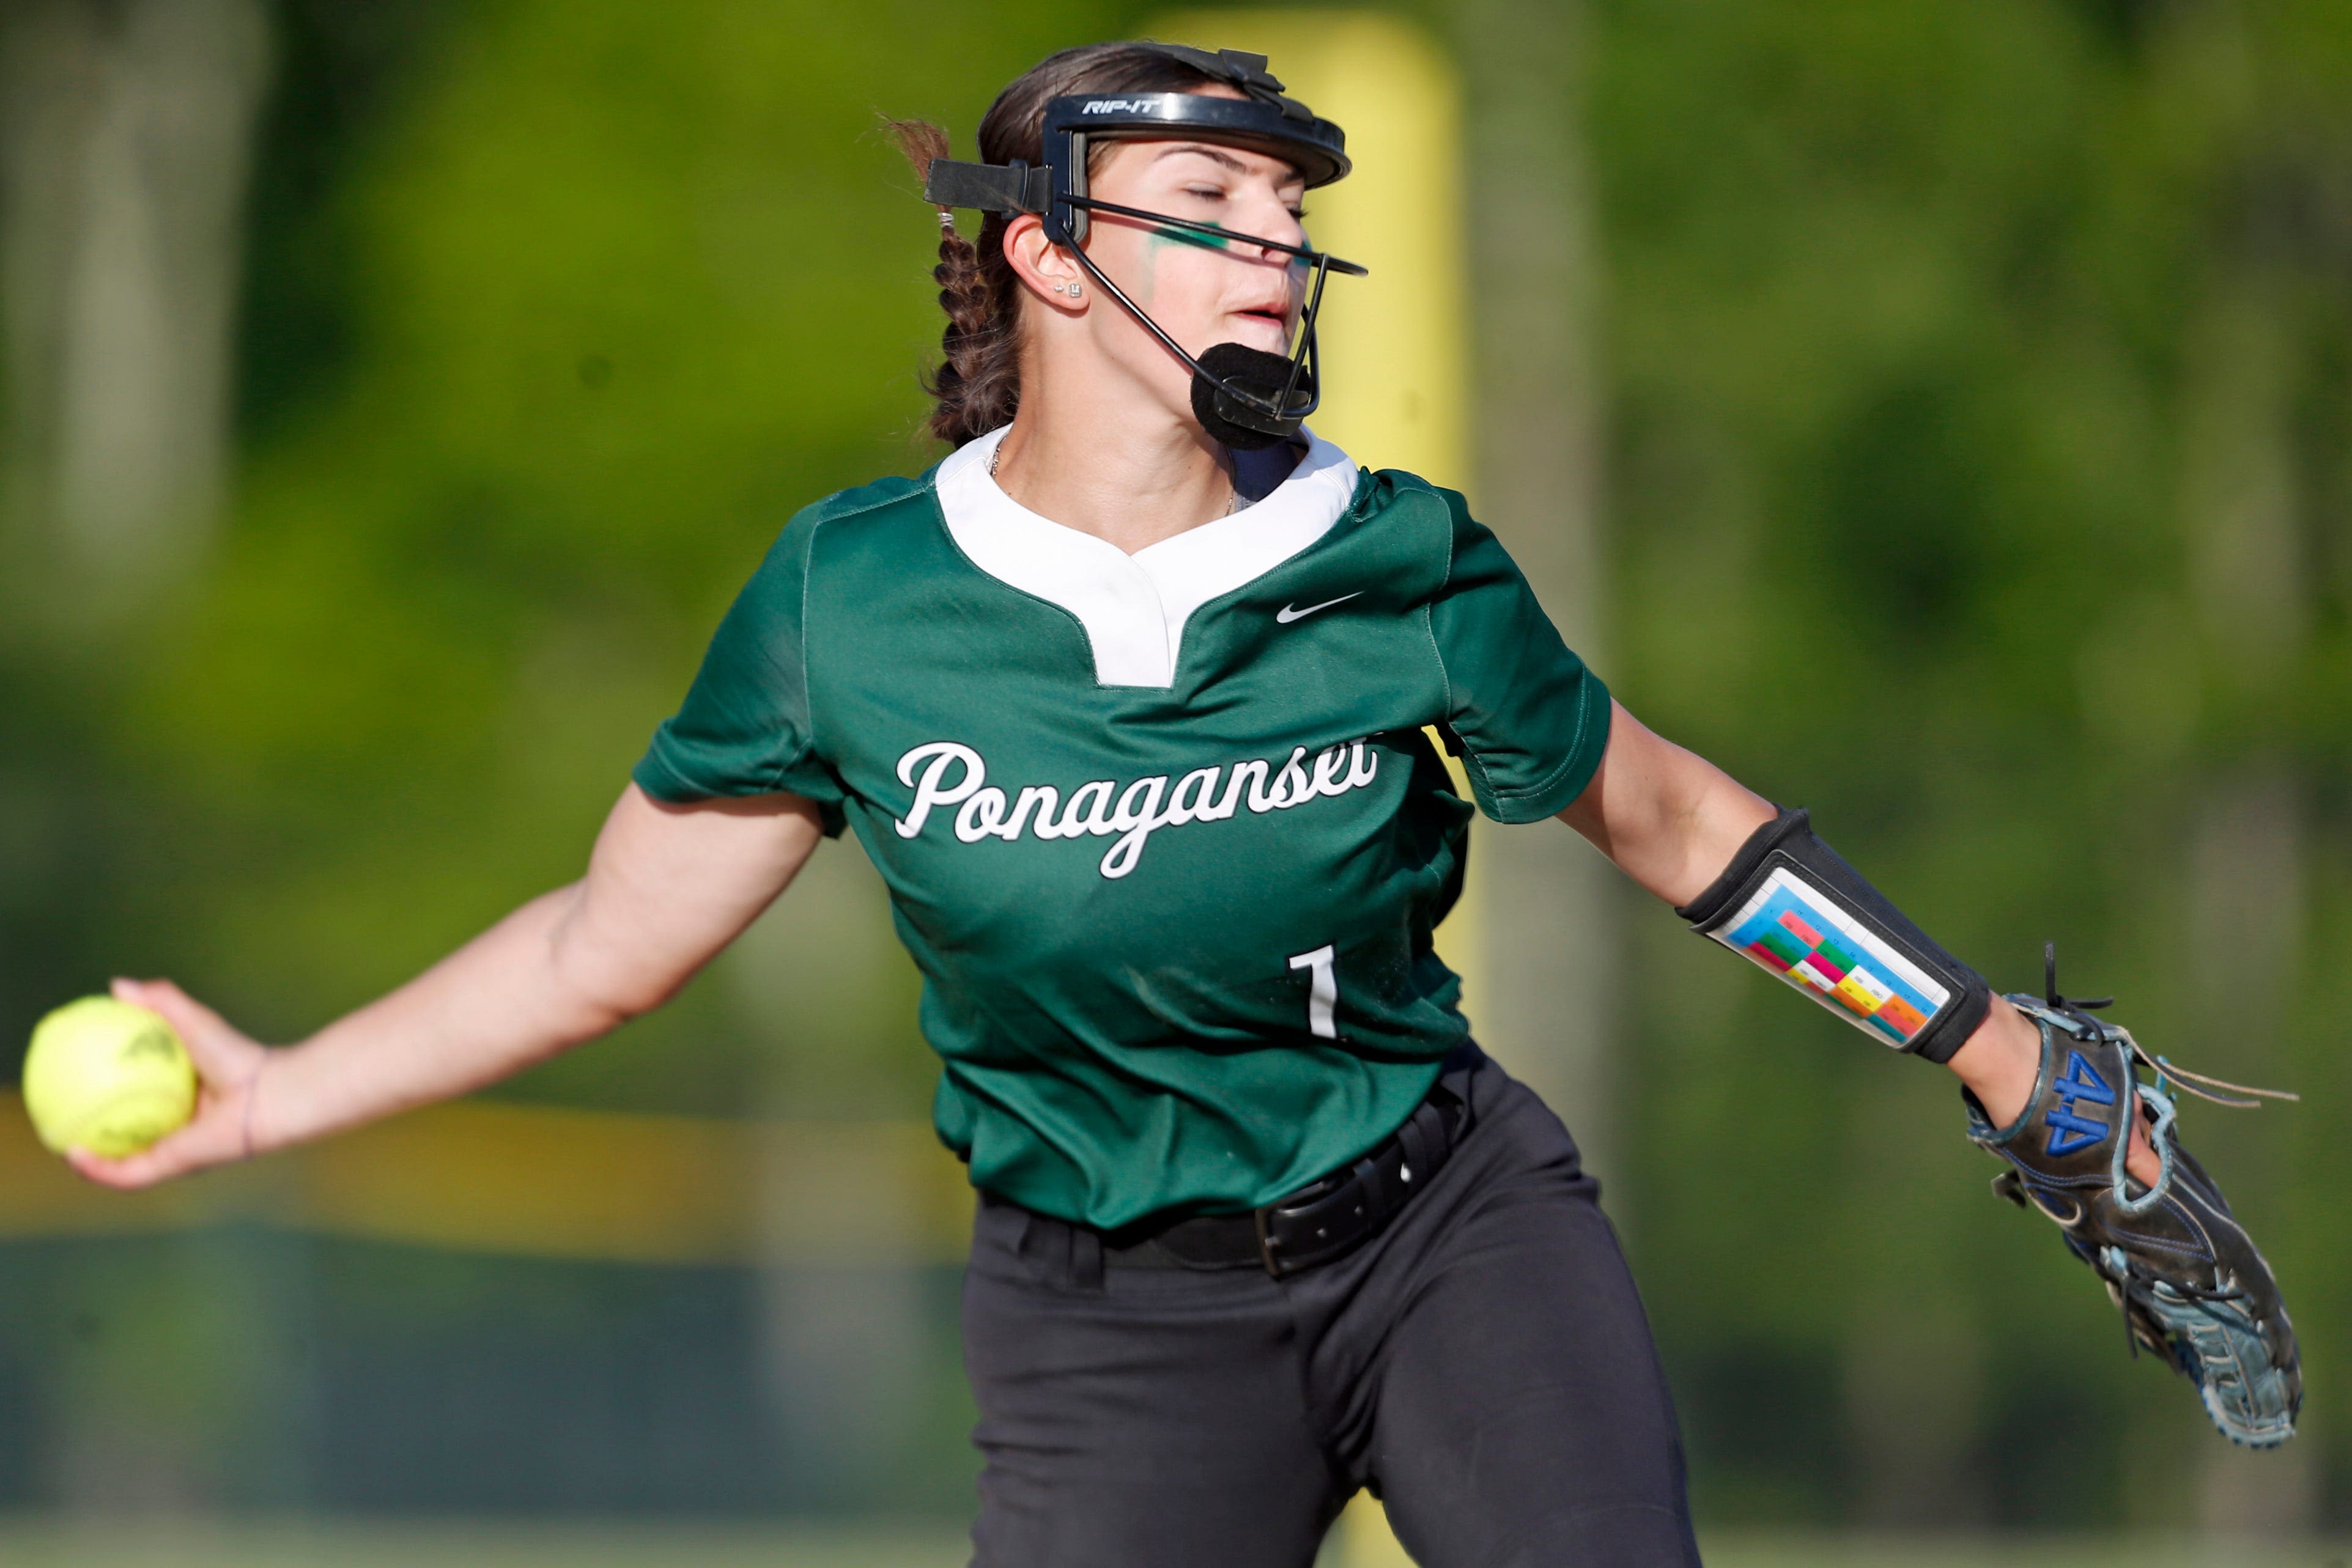 Who will be the Providence Journal Softball Player of the Week? Vote now to decide